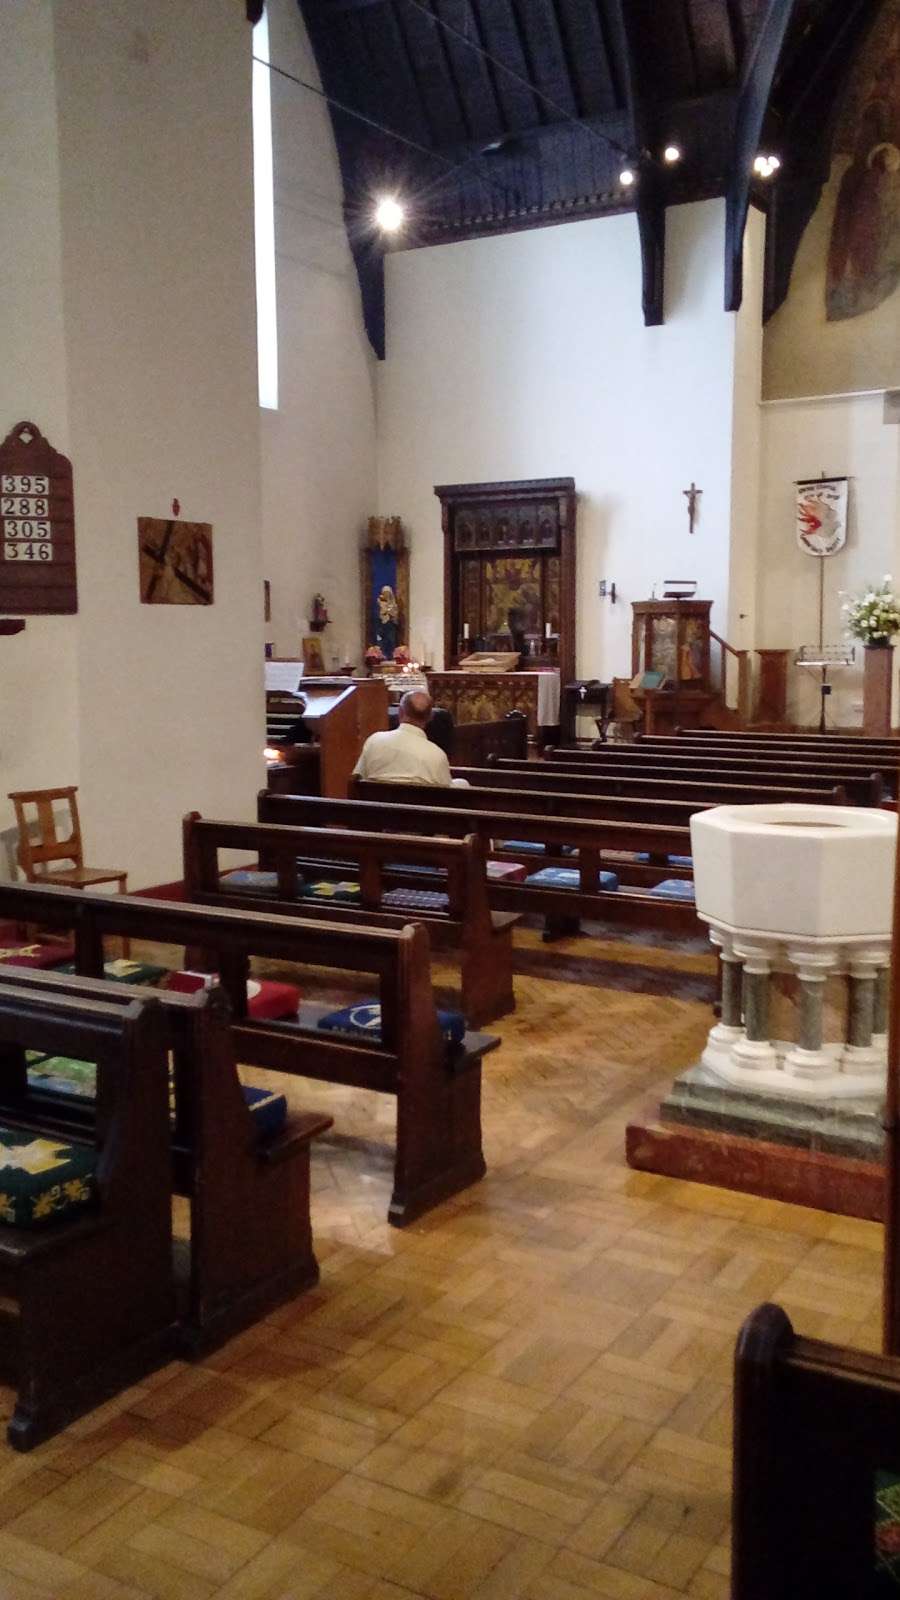 Christ Church, Isle of Dogs | 151 Manchester Rd, Isle of Dogs, London E14 3DR, UK